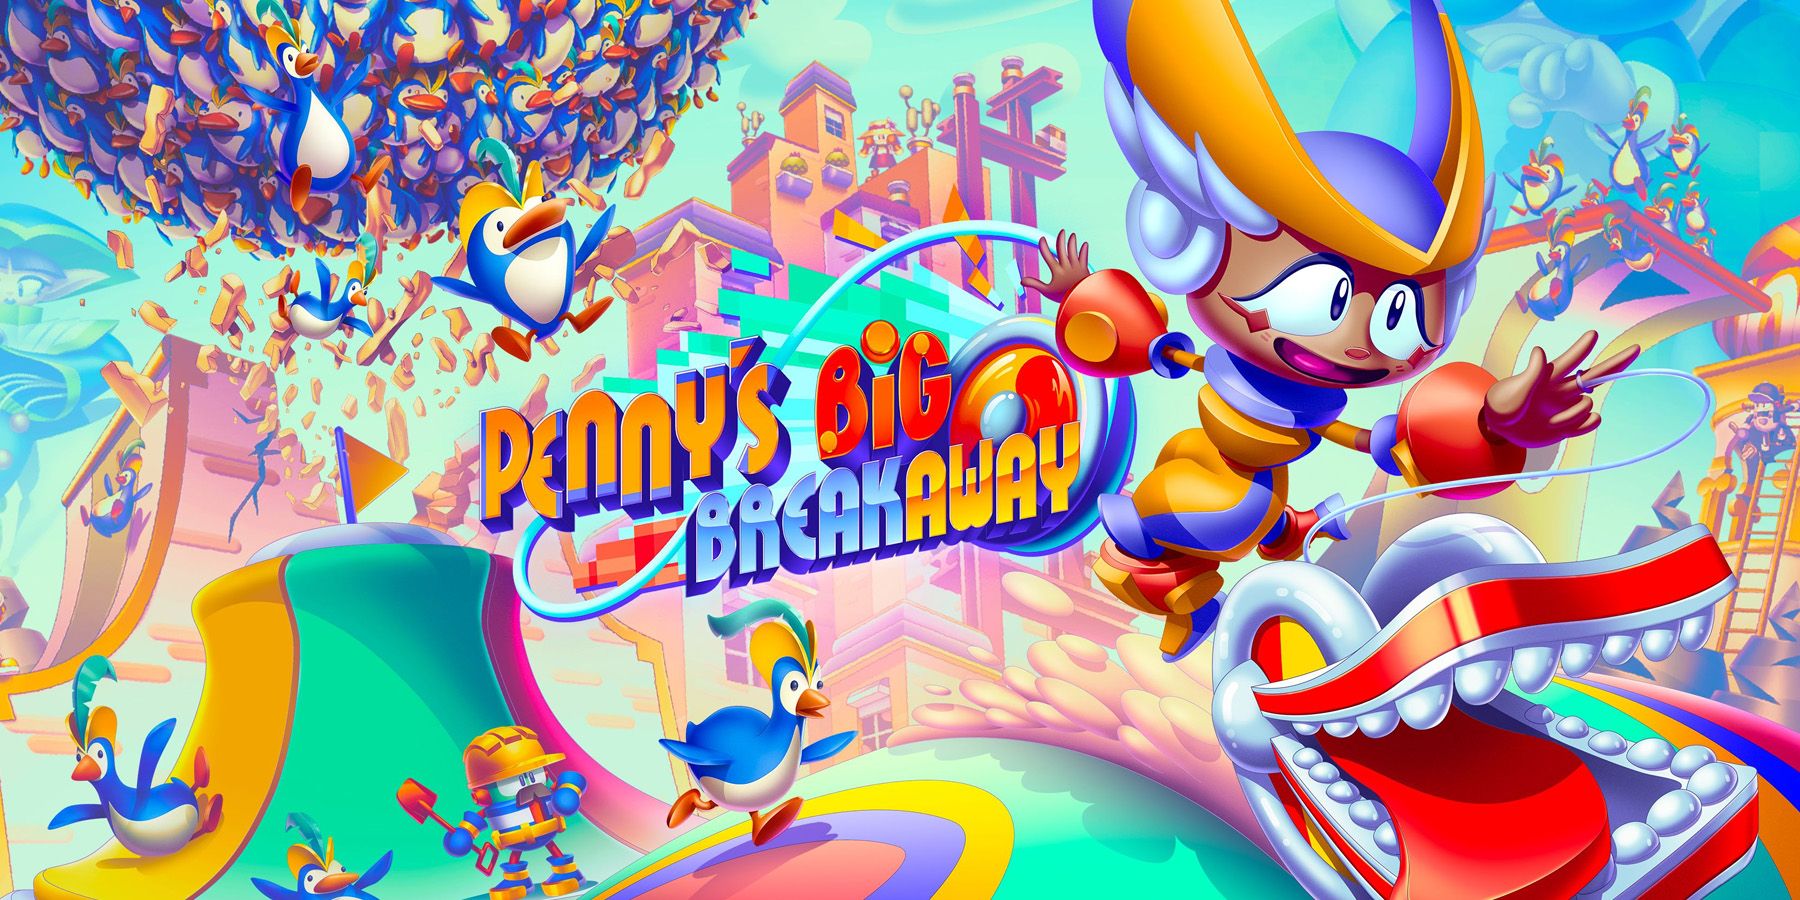 Penny being chased by a giant ball of penguins in key art for Penny's Big Breakaway.